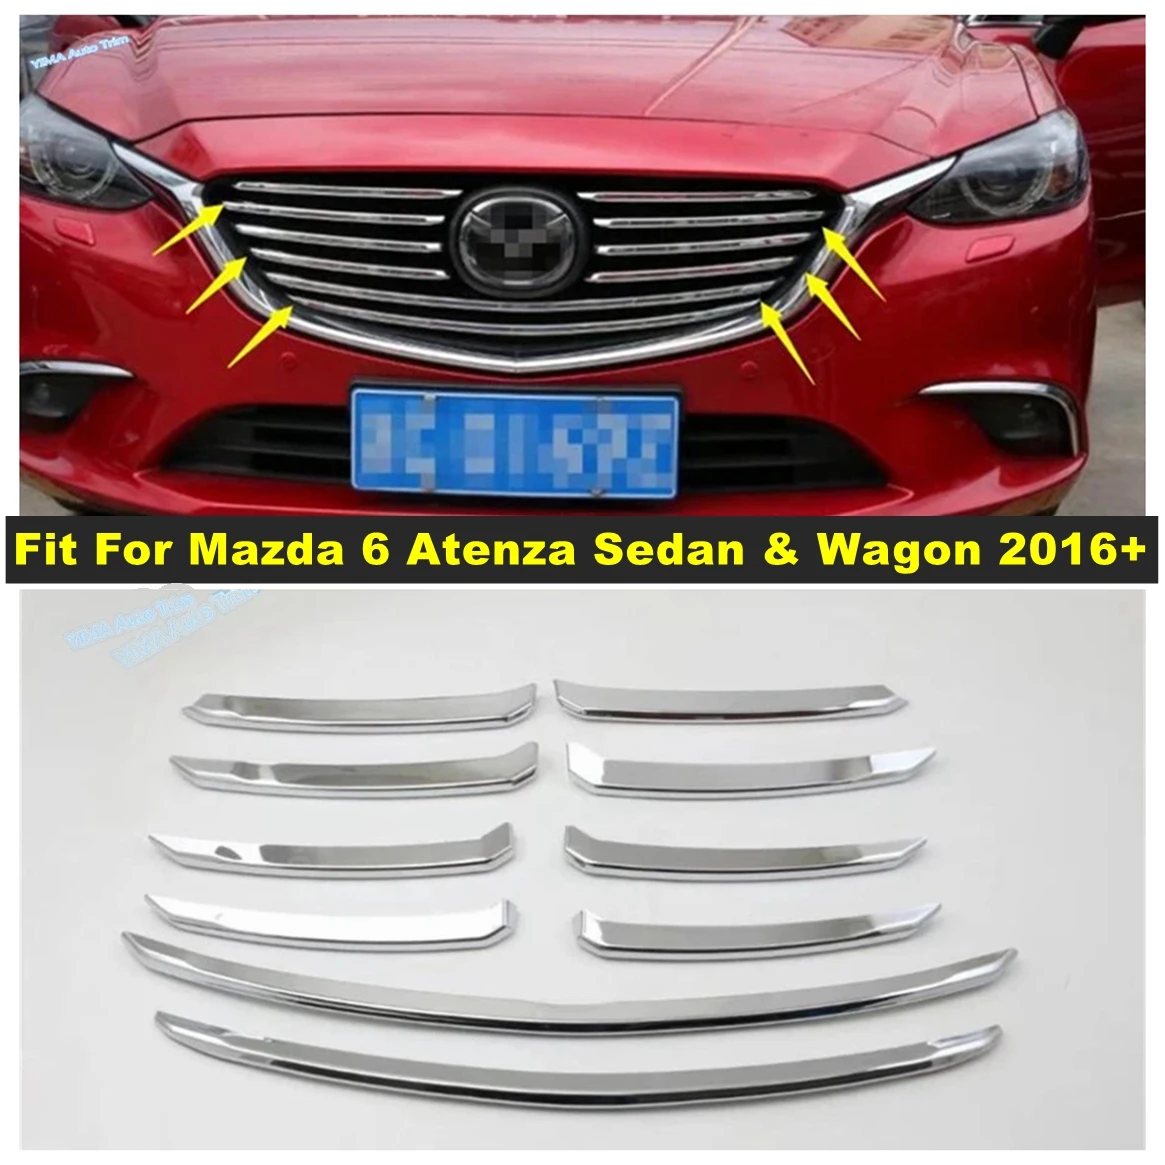 

Car Styling Front Grille Grill Cover Bezel Trim Fit For Mazda 6 Atenza Sedan & Wagon 2016 2017 ABS Exterior Exterior Accessories